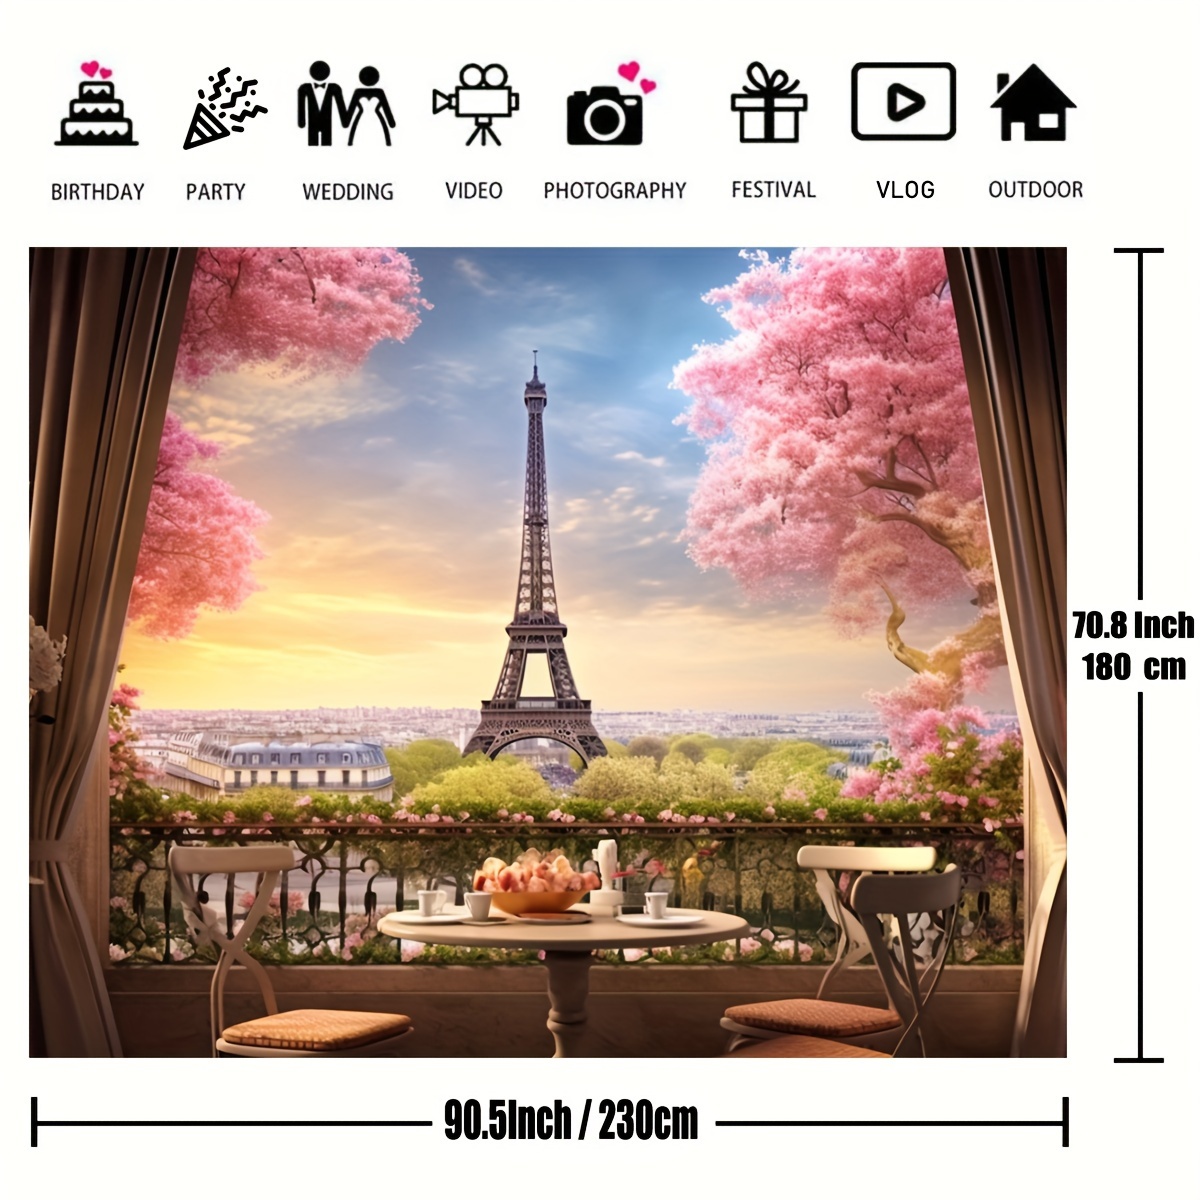 1pc french paris eiffel tower garden backdrop photoshoot flowers tree curtain sunset landscape city view photography background adults wedding portraits vacation banner props party decor supplies home decor supplies indoor outdoor decor